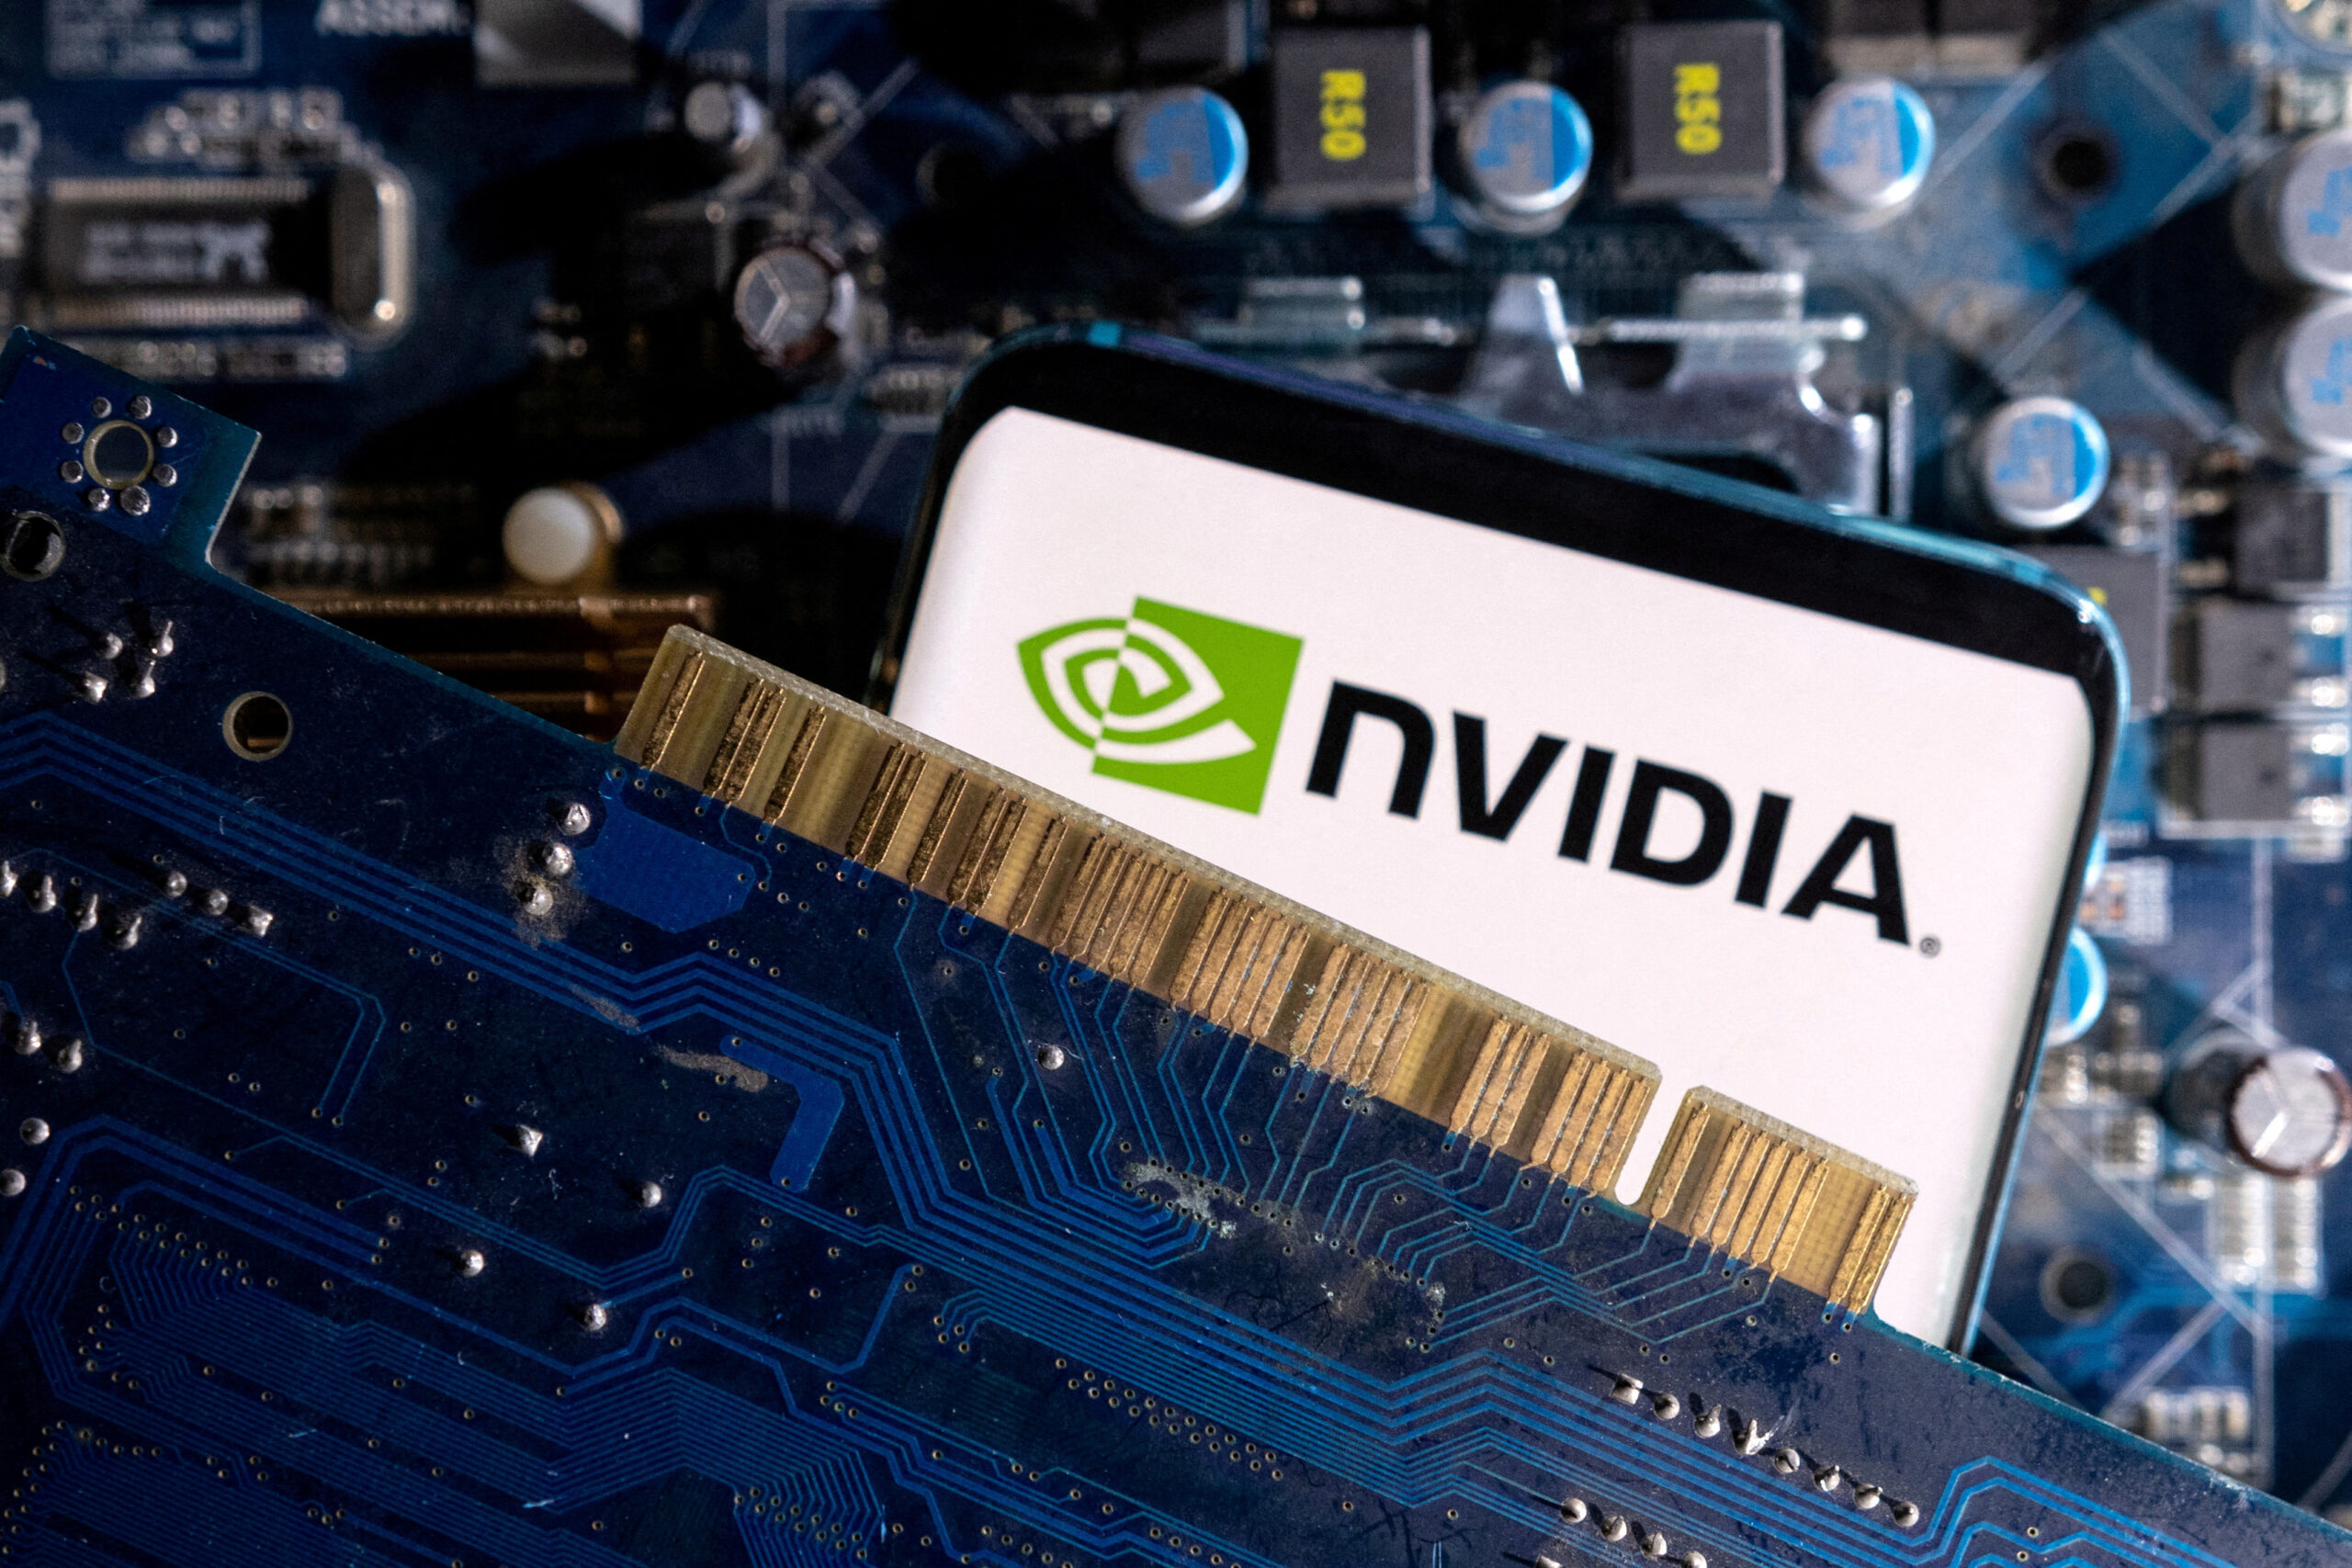 Nvidia has surpassed Microsoft in market capitalization to become the top-ranked publicly traded company by value